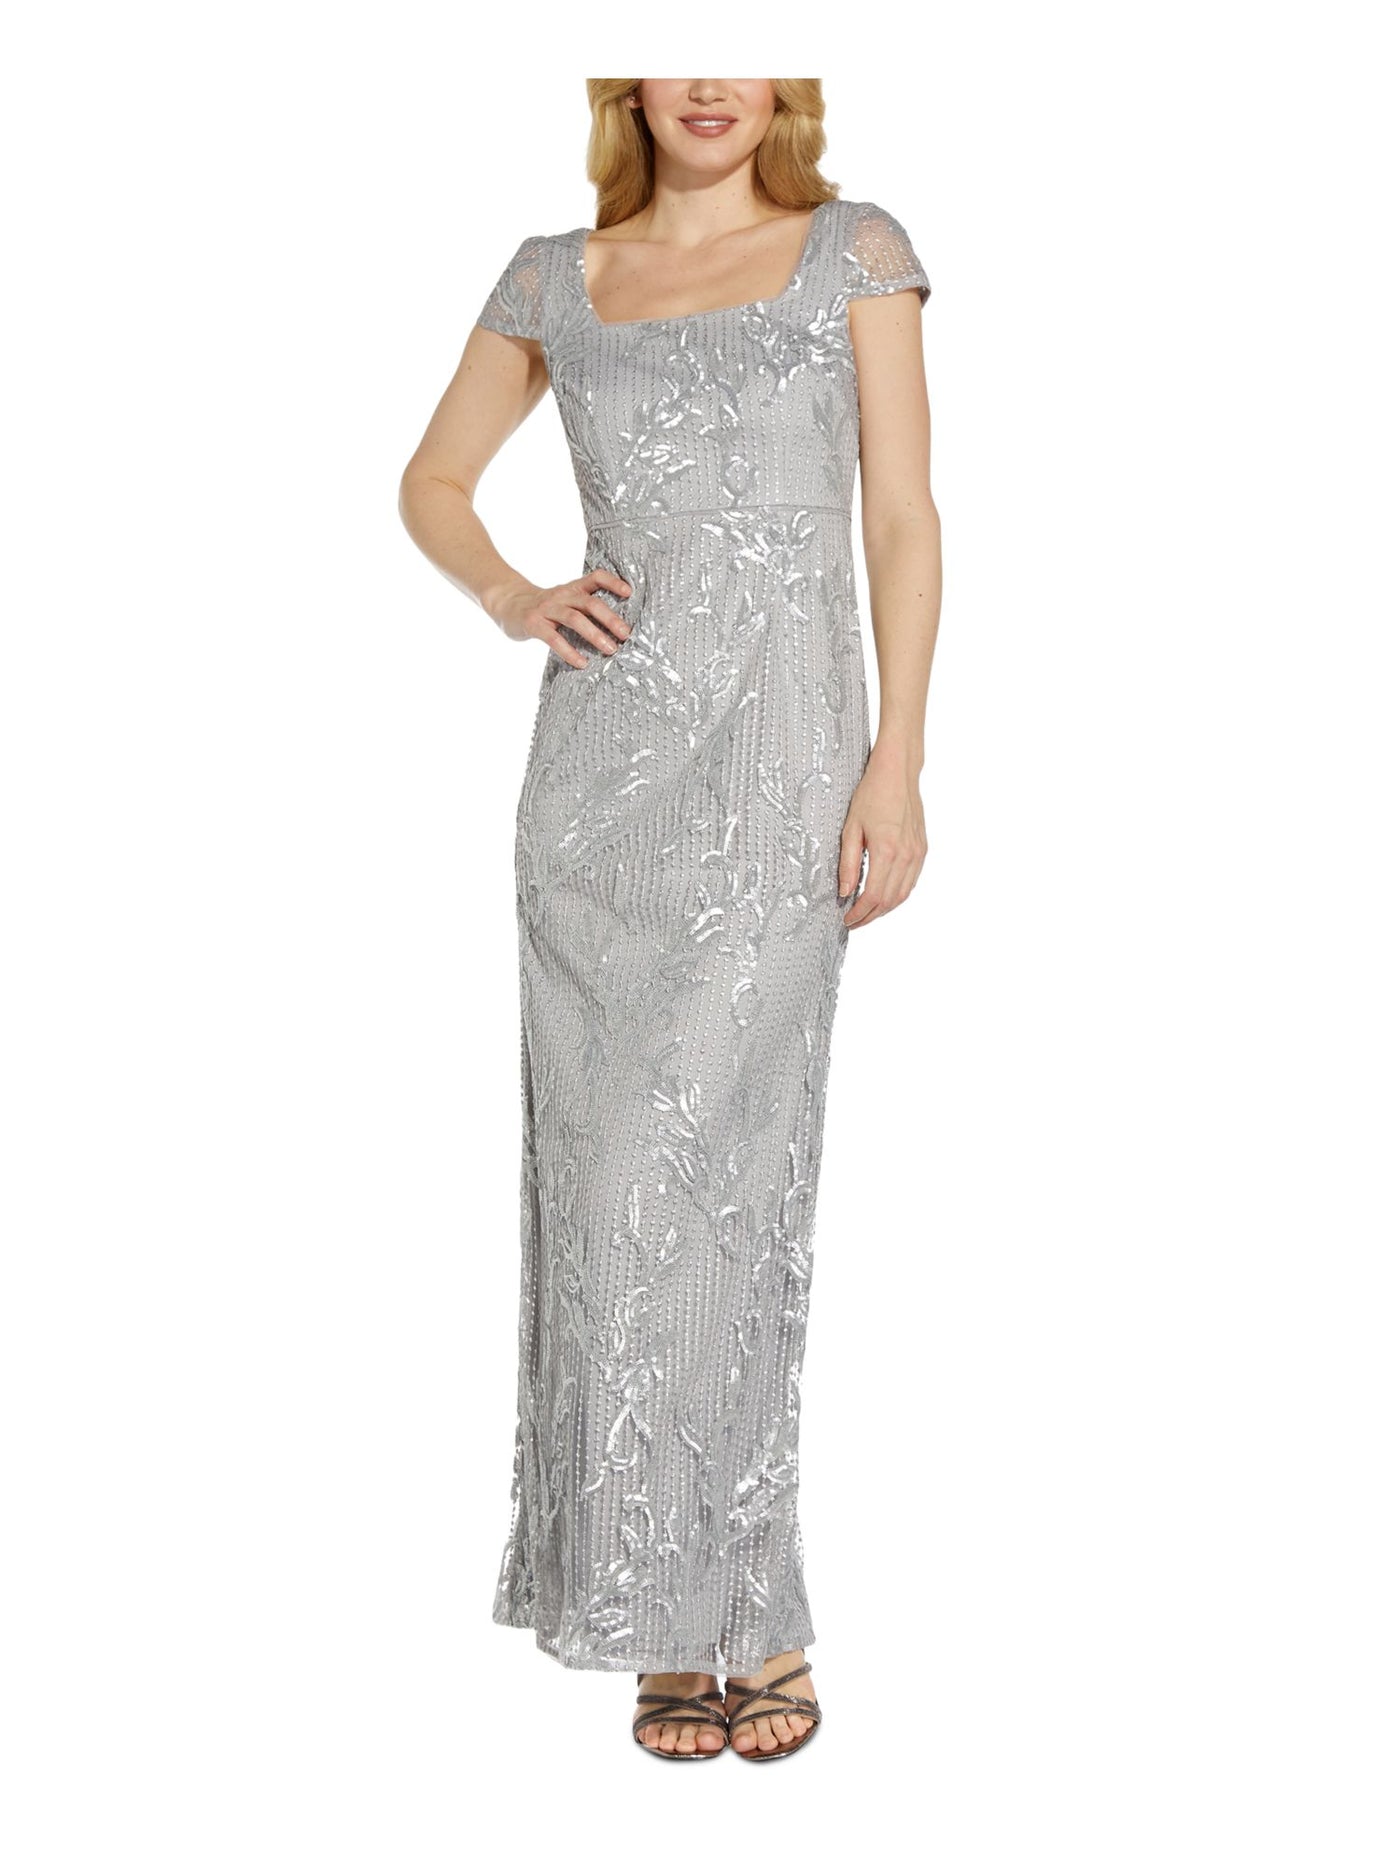 ADRIANNA PAPELL Womens Silver Zippered Embellished Gown Cap Sleeve Square Neck Maxi Formal Mermaid Dress 0